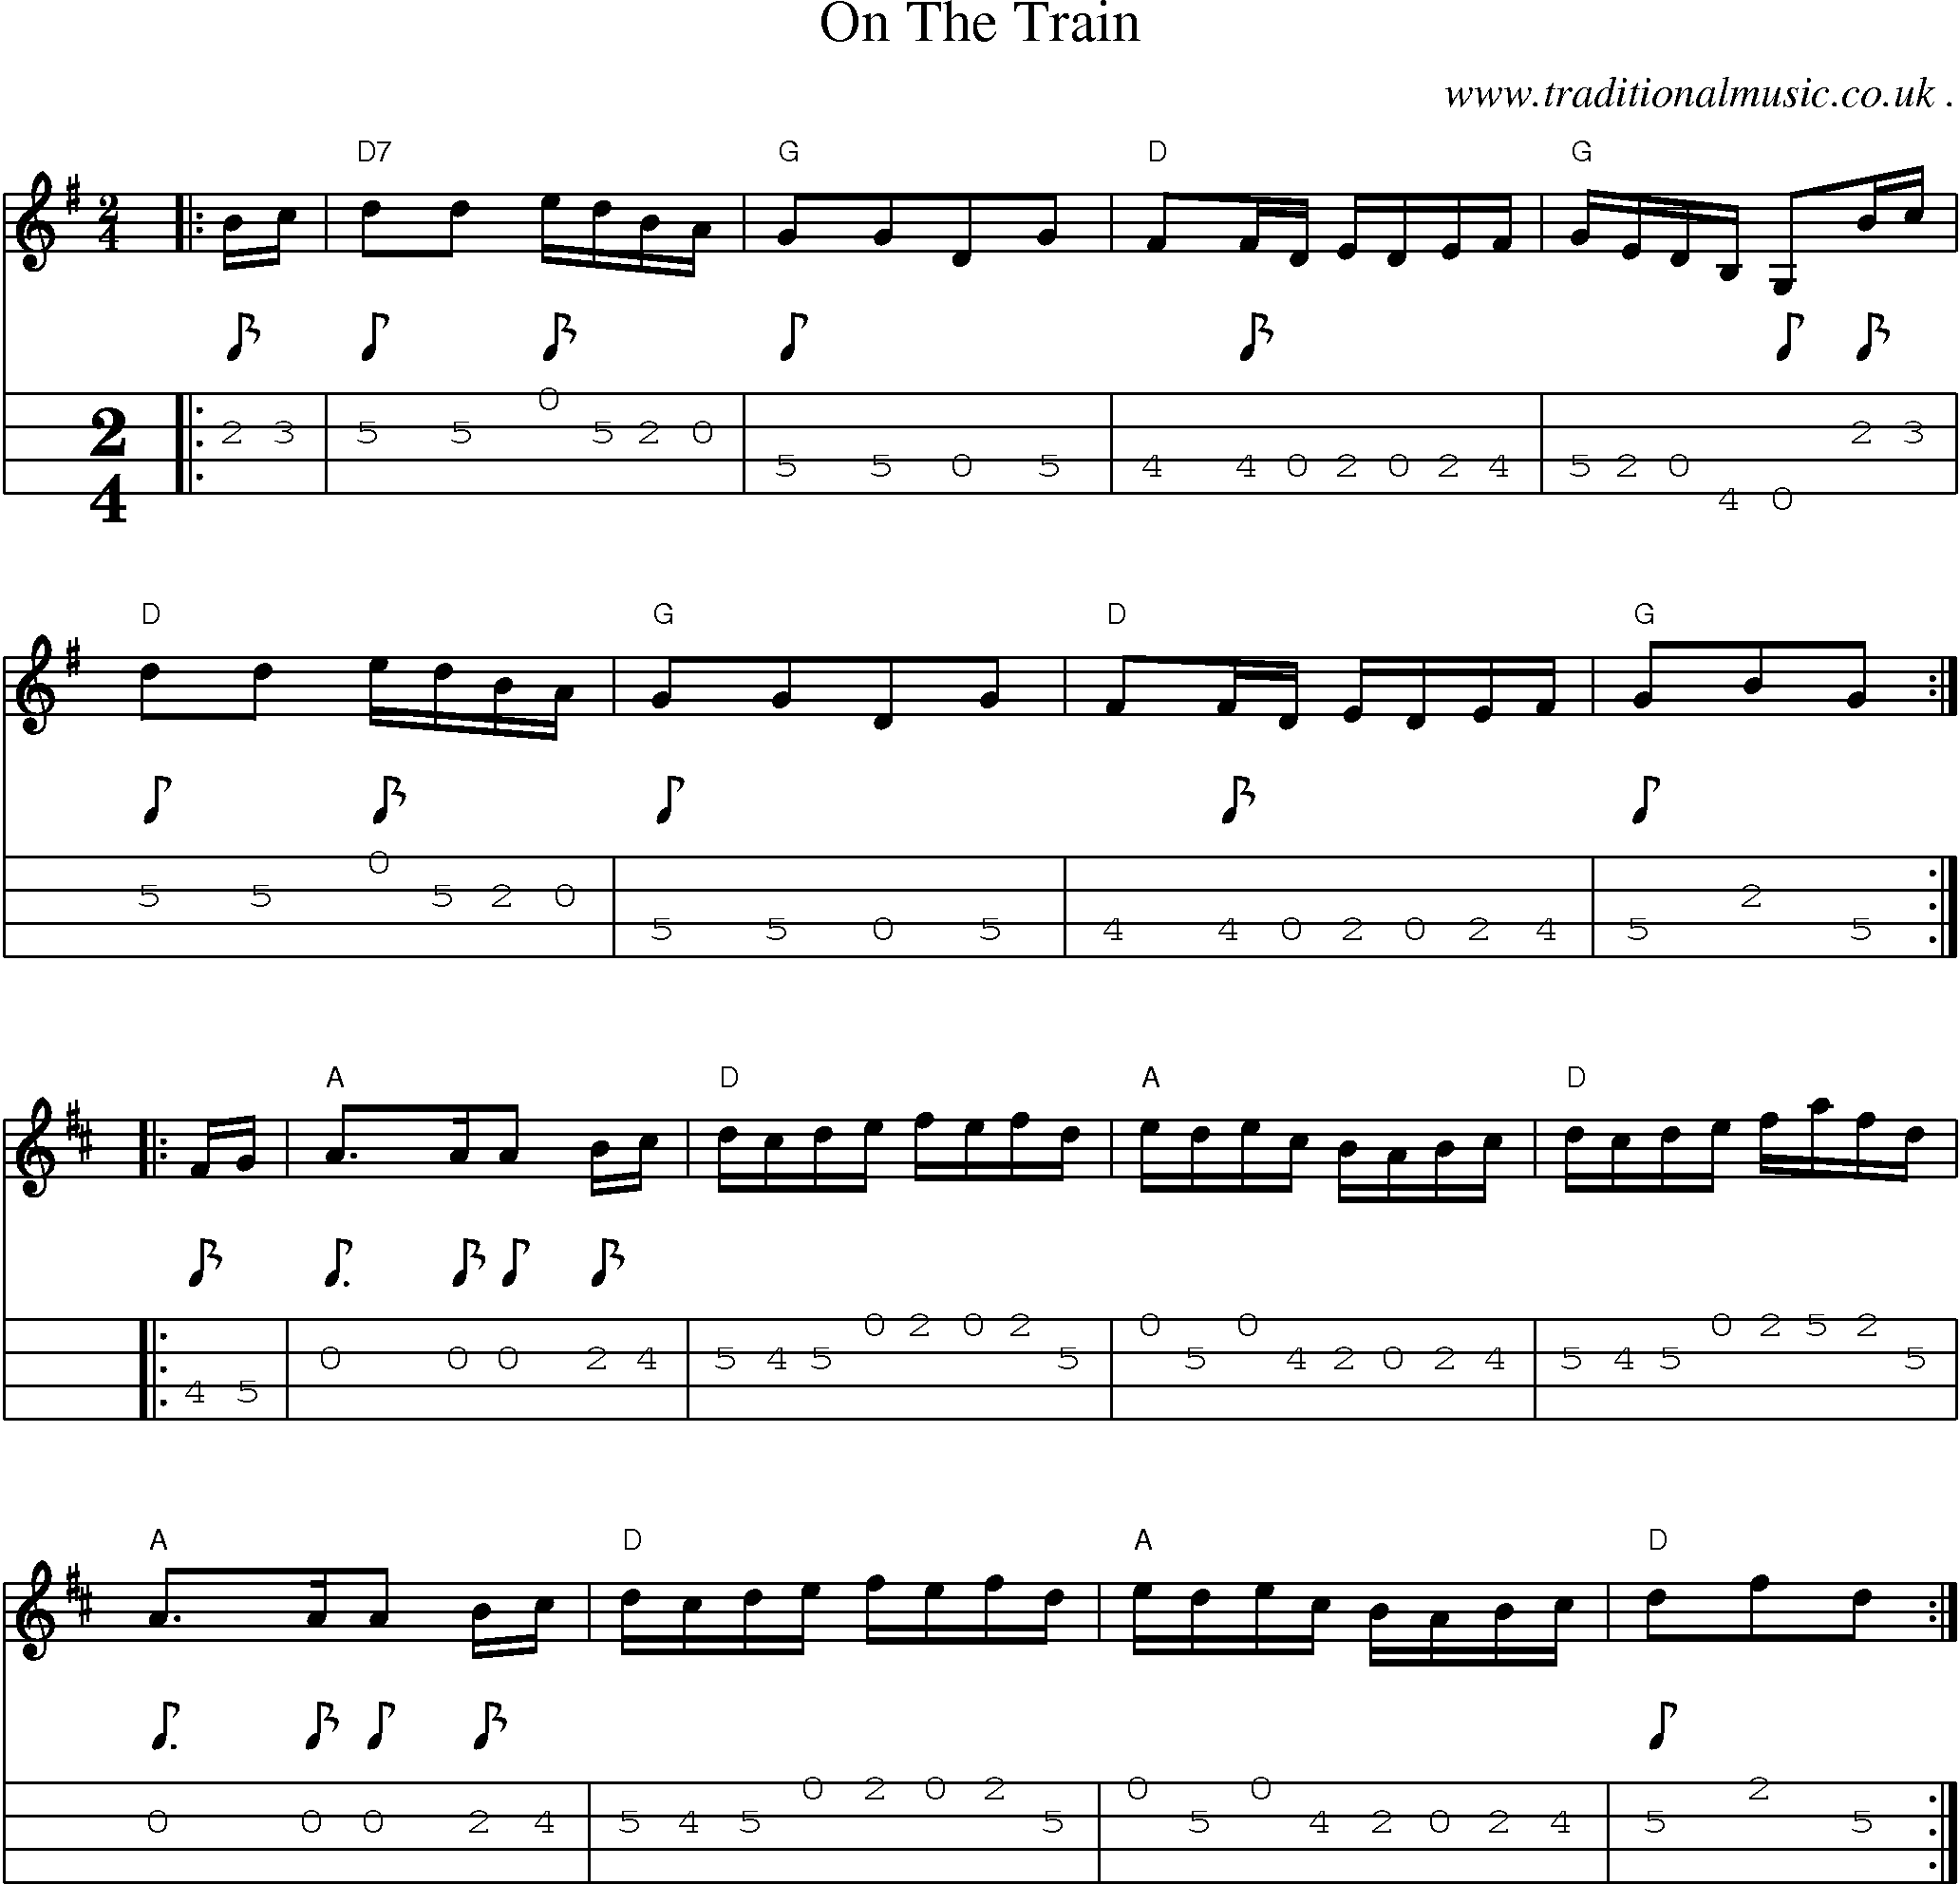 Music Score and Guitar Tabs for On The Train